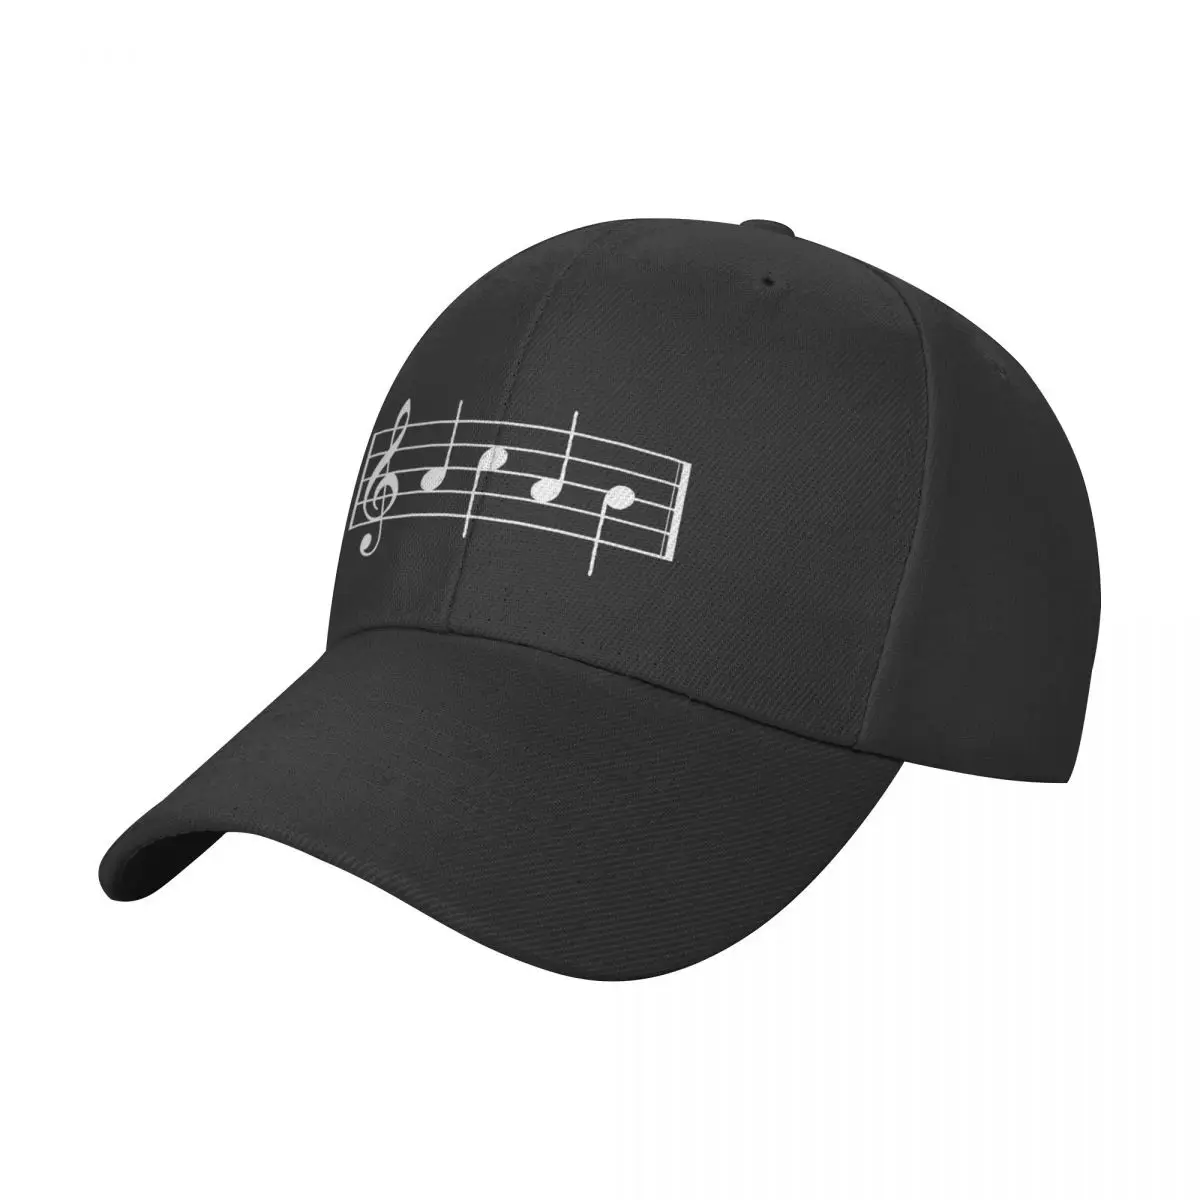 

ACAB In Musical Notes Baseball Cap summer hats Sports Caps New In The Hat Hats For Women Men's